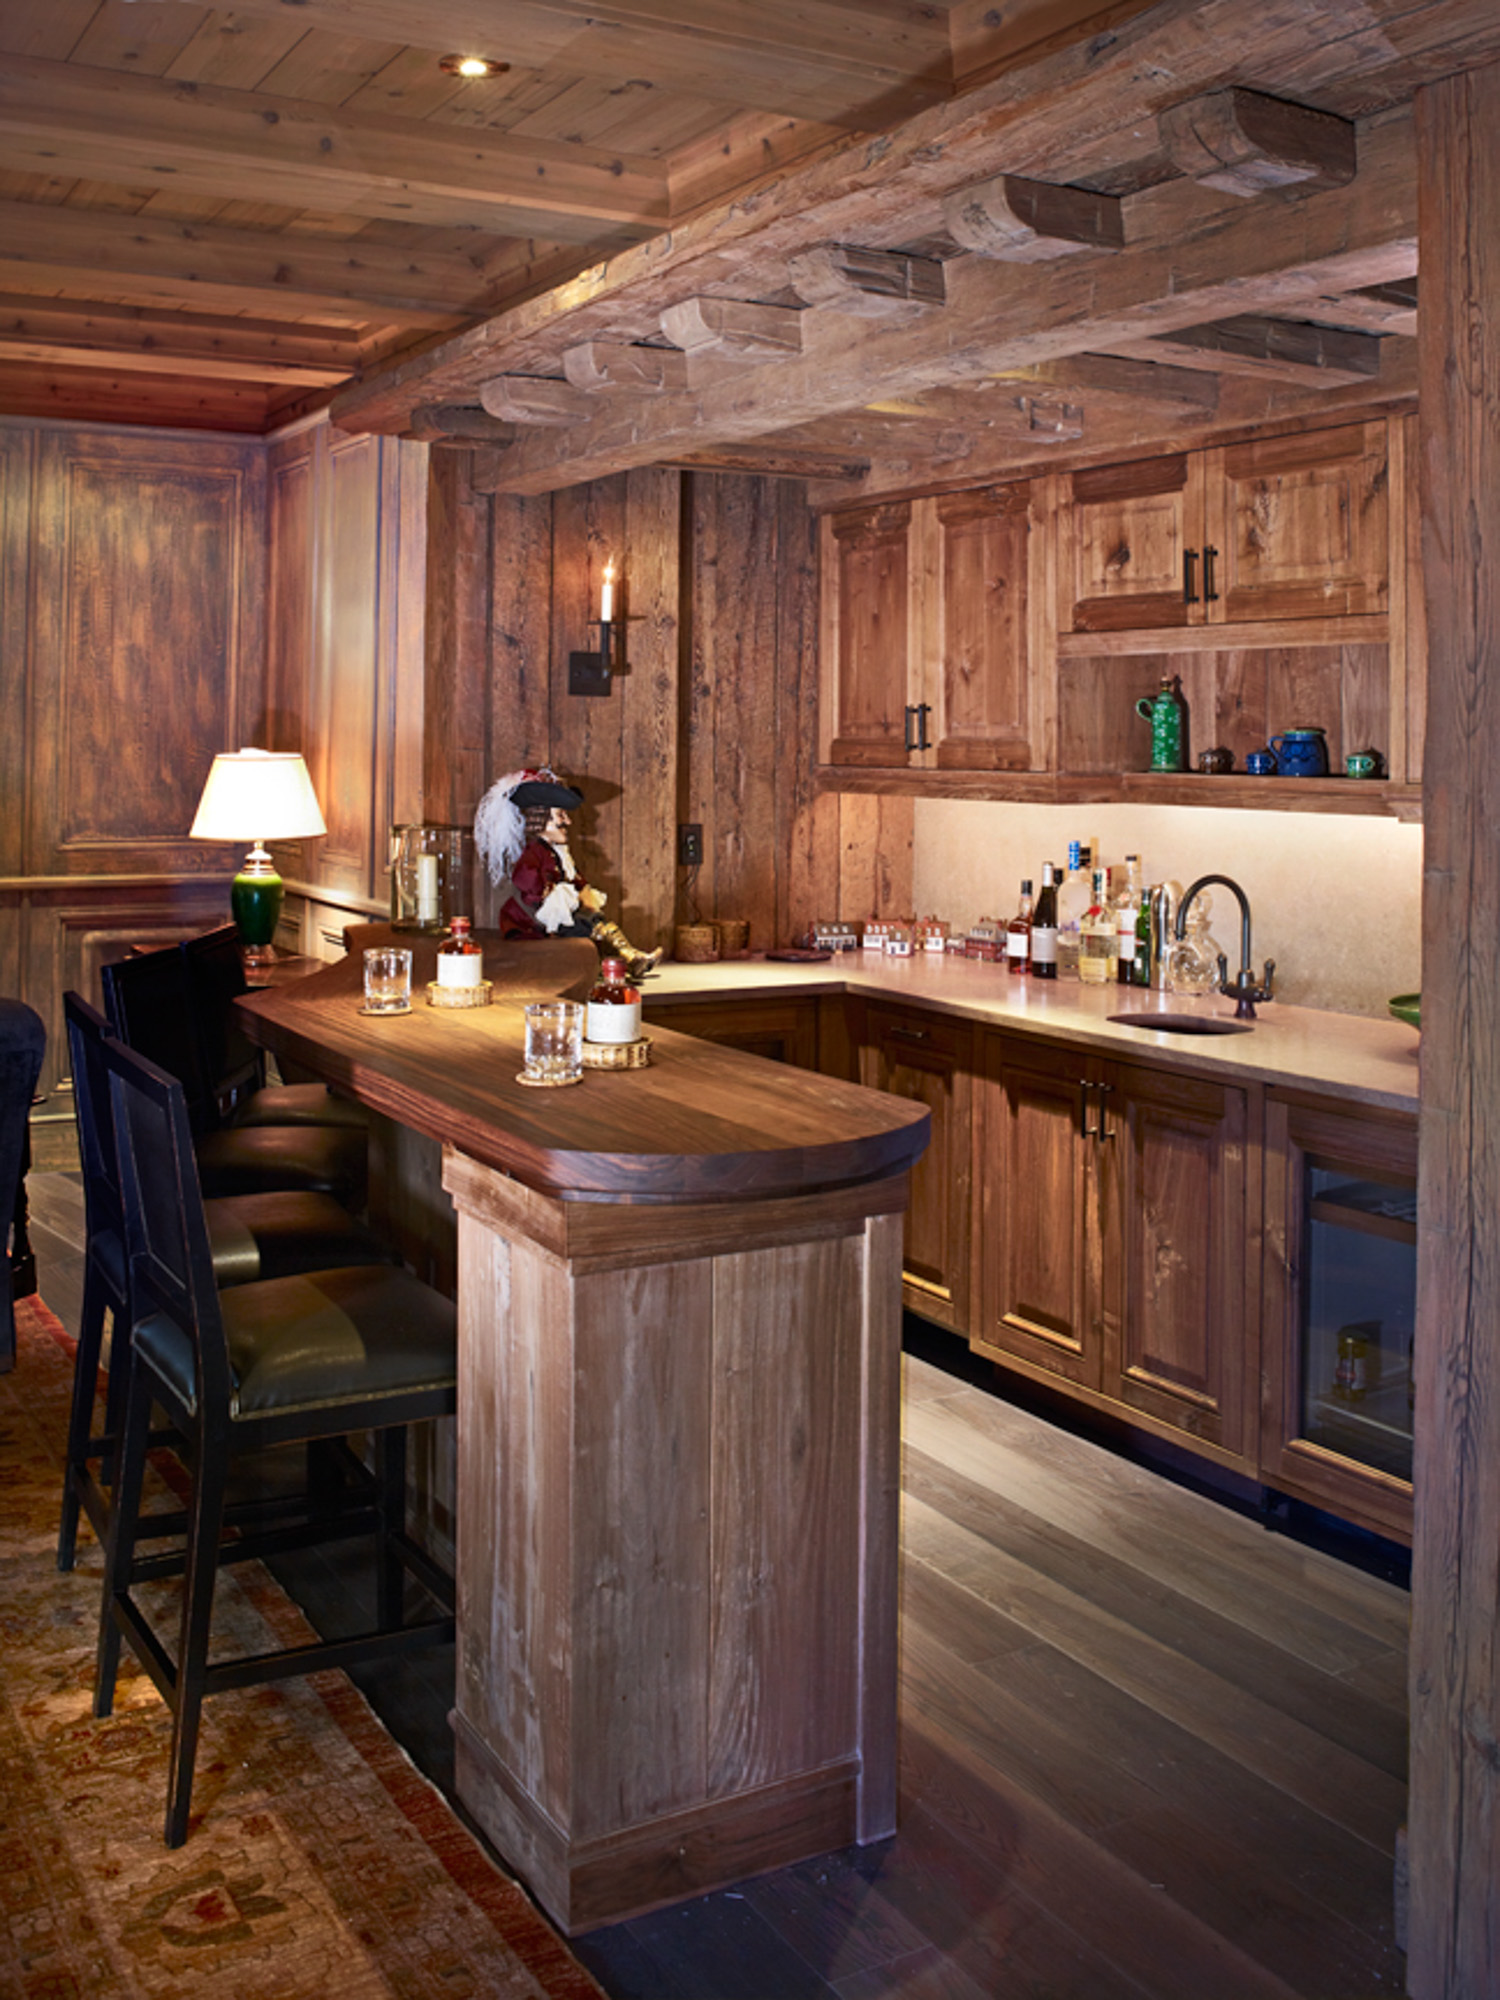 A rustic-style kitchen with brown wooden cabinets and a wooden beamed ceiling at hornsilver